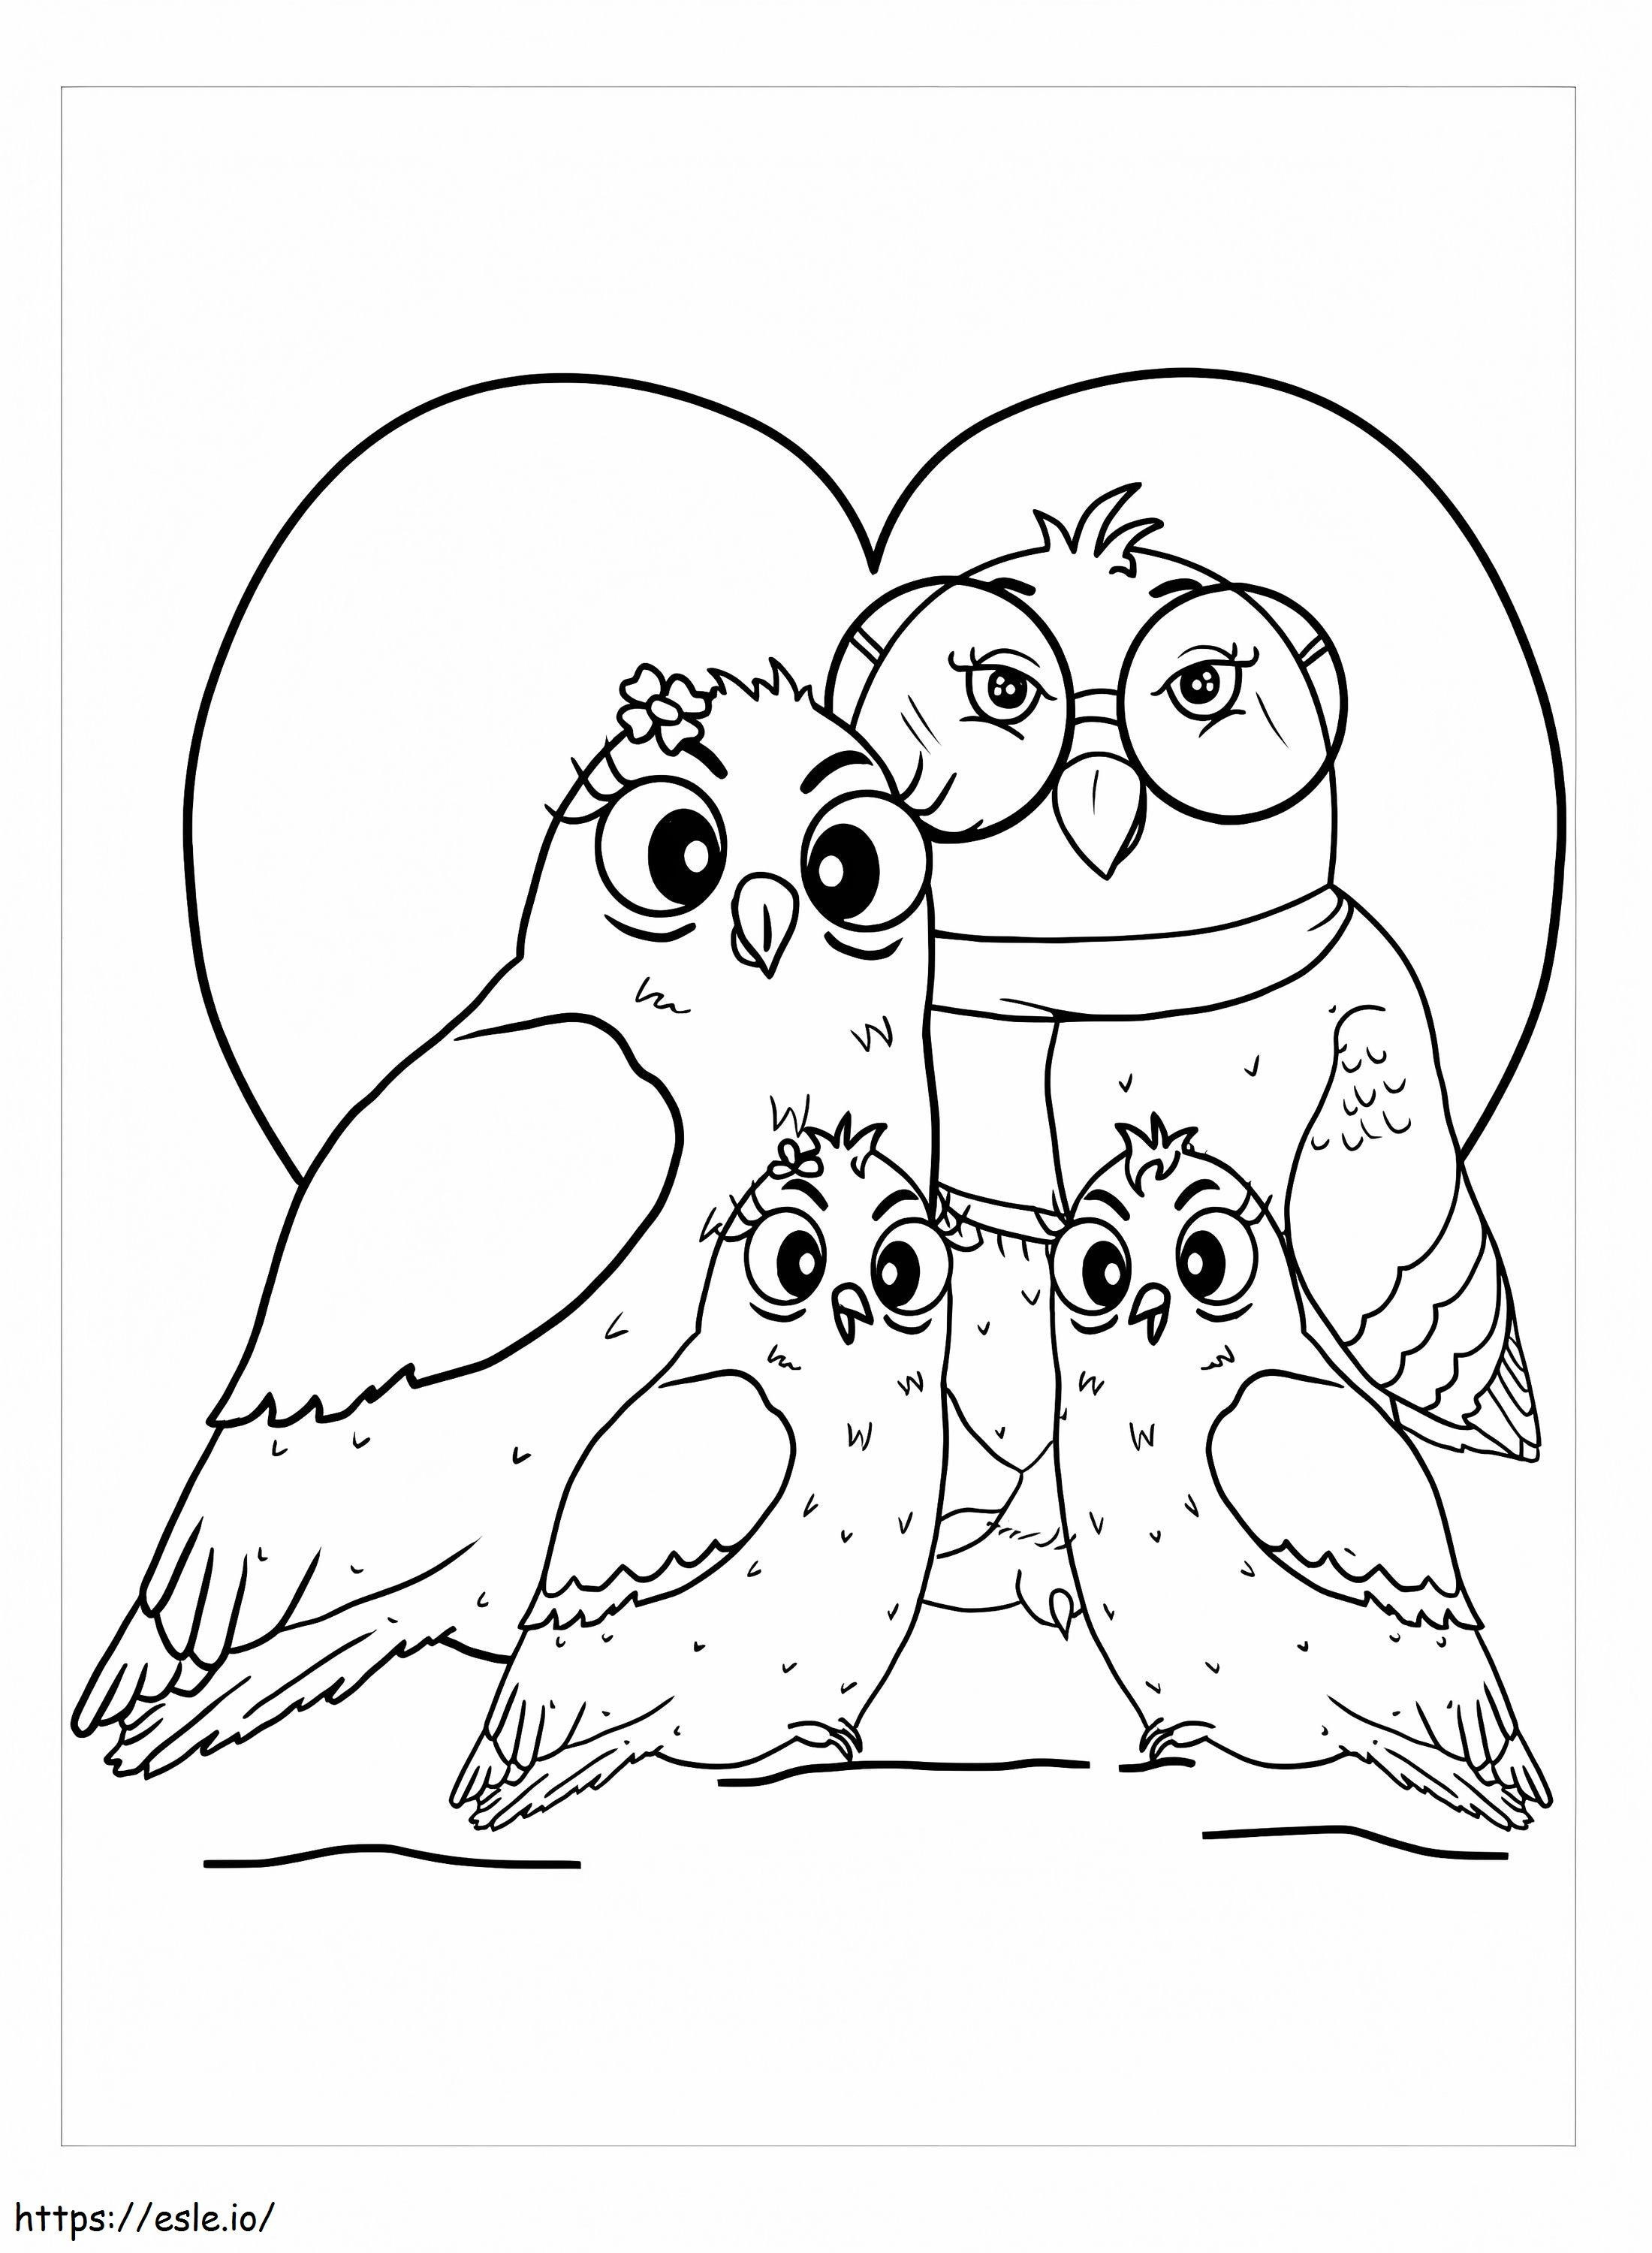 Hole Familiar coloring page